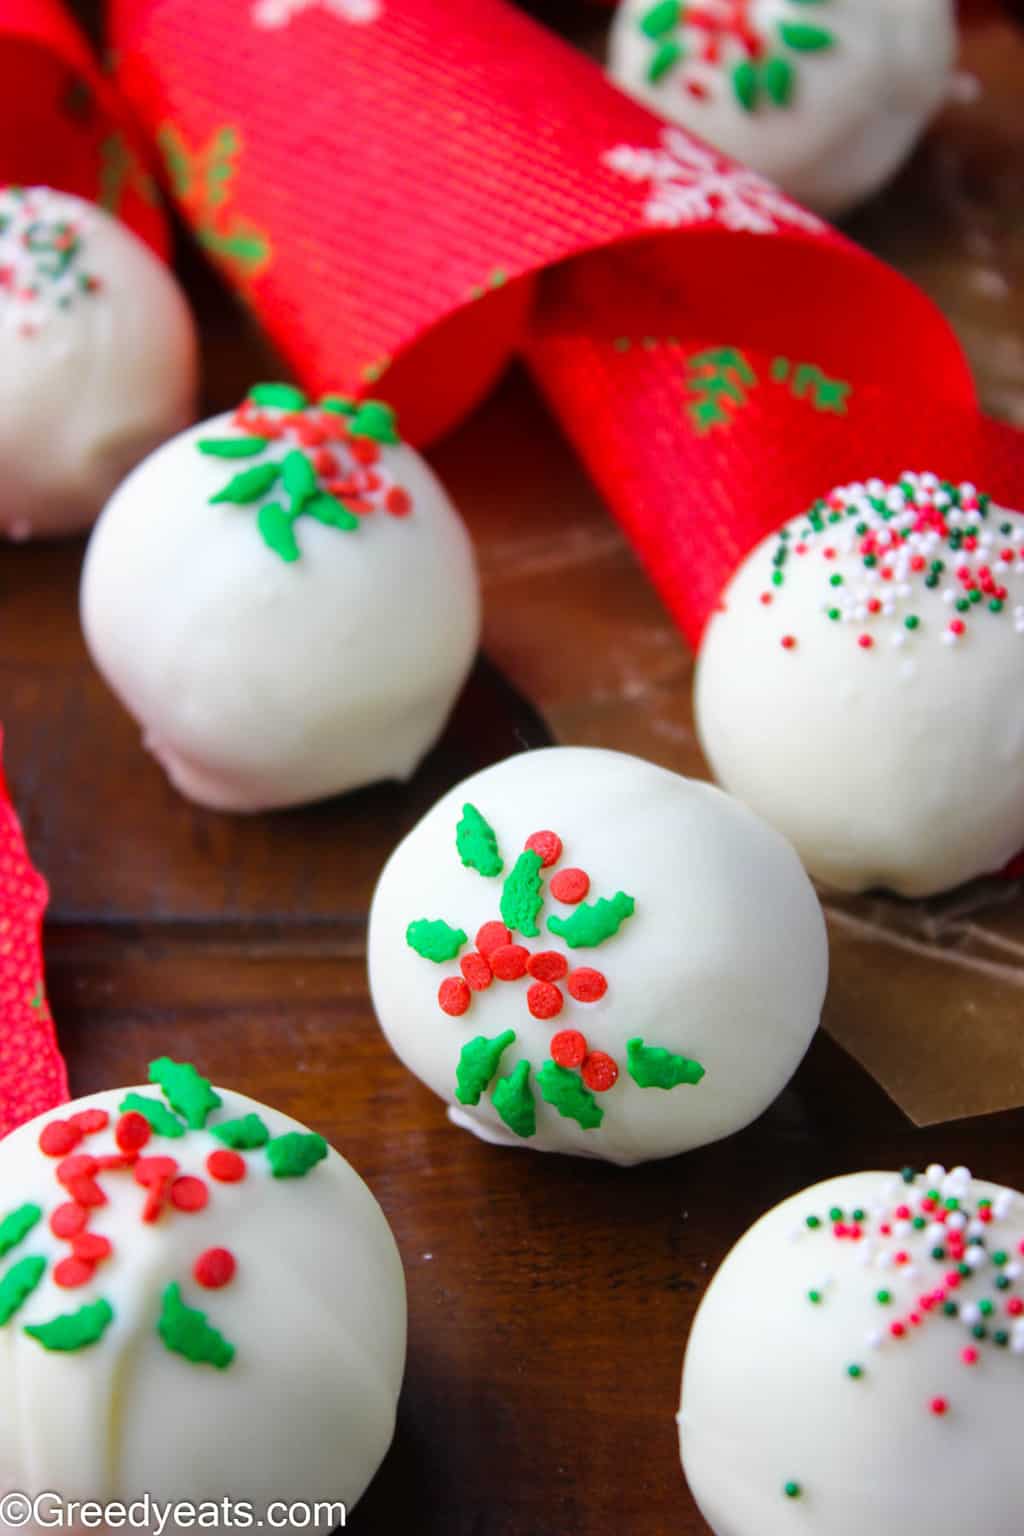 These Sugar Cookie Truffles, made with 3 ingredients will literally melt in your mouth.